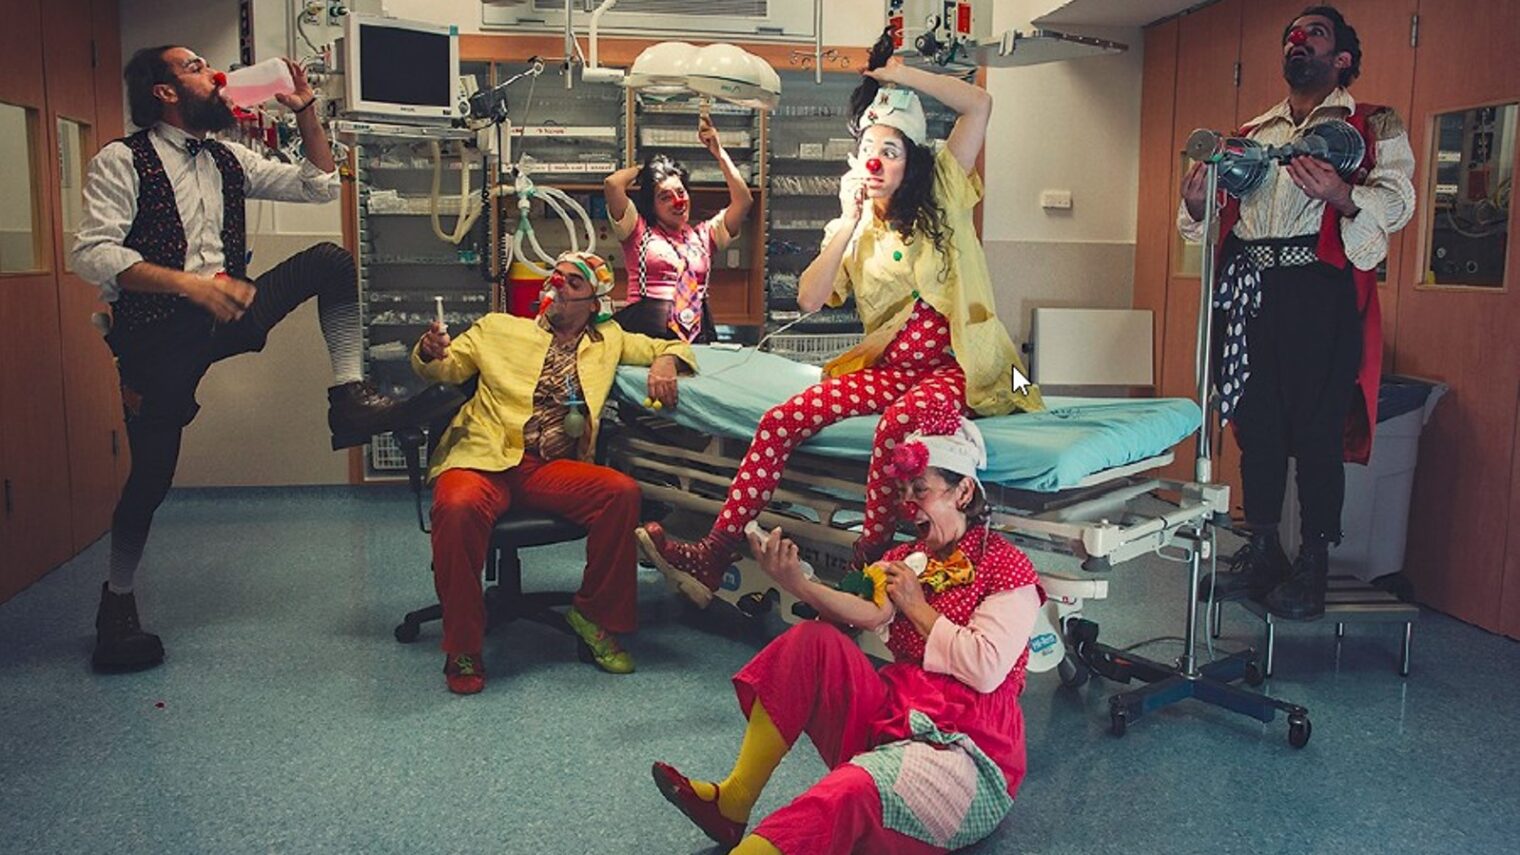 Medical clowning looks fun but it’s a serious profession in Israel. Photo by Alexey Kudrik